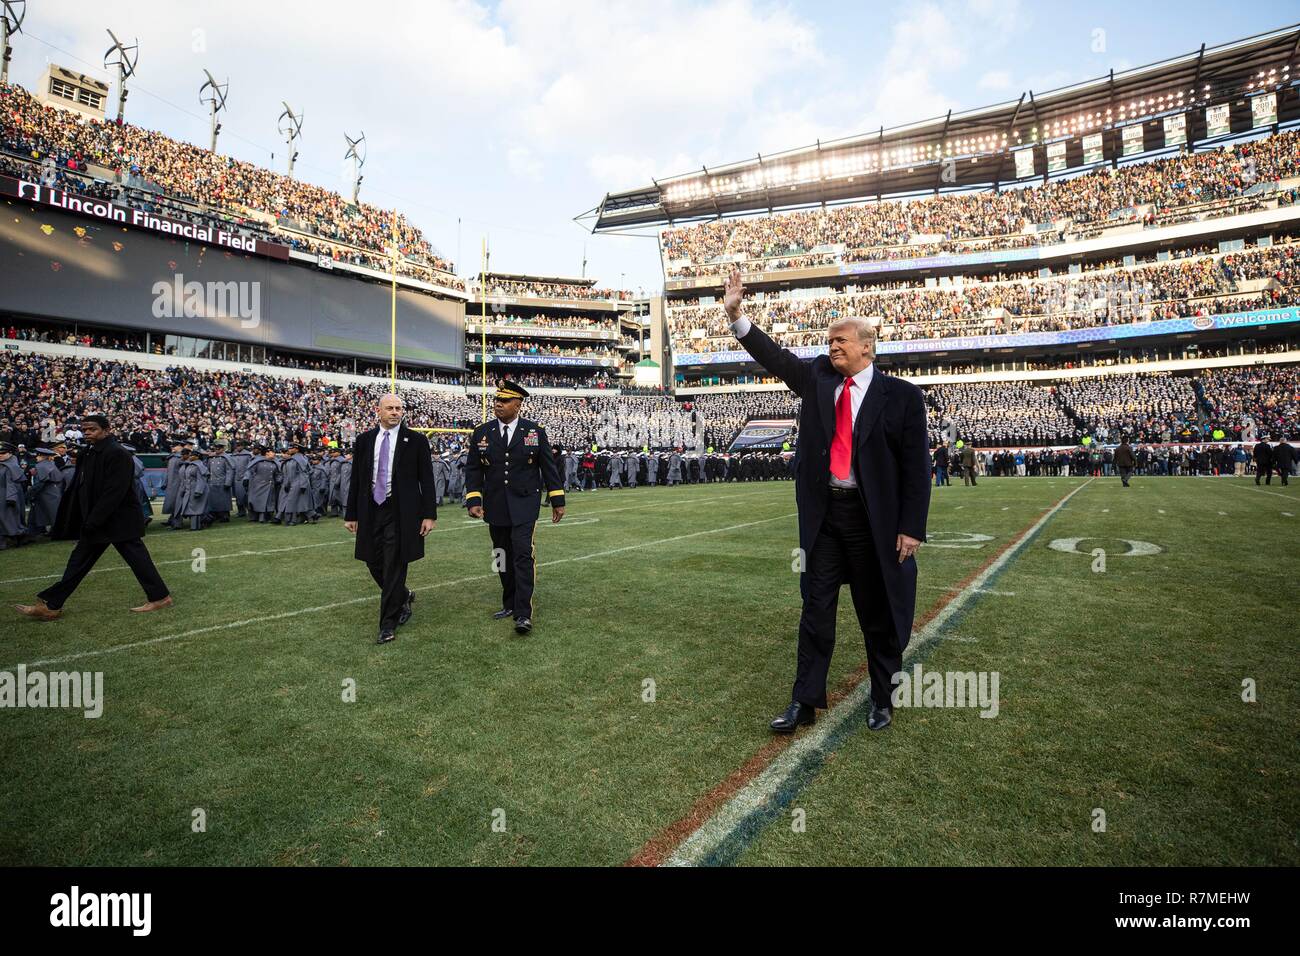 U.S President Donald Trump waves as he walks onto the playing field before the start of the 119th Army Navy game at Lincoln Financial Field December 8, 2018 in Philadelphia, Pennsylvania. Stock Photo